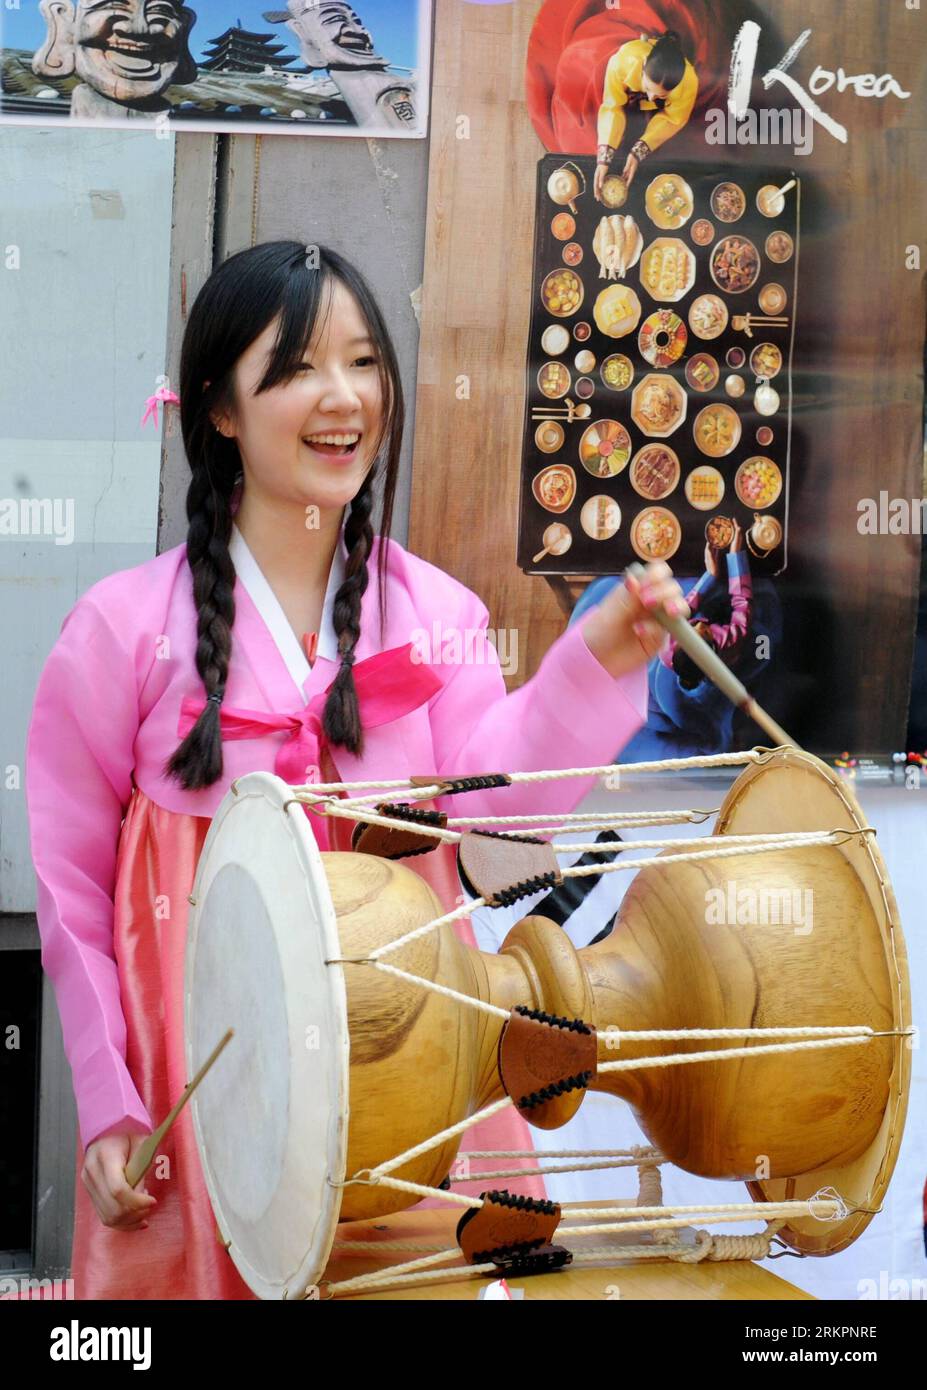 Bildnummer: 58036403  Datum: 26.05.2012  Copyright: imago/Xinhua (120526) -- TIANJIN, May 26, 2012 (Xinhua) -- A South Korean student performs at an international student cultural festival of Tianjin University in Tianjin, north China, May 26, 2012. International students from 88 countries and regions took part in the cultural festival here on Friday. (Xinhua/Wang Kun)(mcg) CHINA-TIANJIN-FOREIGN STUDENT-CULTURAL FESTIVAL (CN) PUBLICATIONxNOTxINxCHN Gesellschaft x2x xsk 2012 hoch  o0 Musik Trommler Trommeln Tradition     58036403 Date 26 05 2012 Copyright Imago XINHUA  Tianjin May 26 2012 XINHU Stock Photo